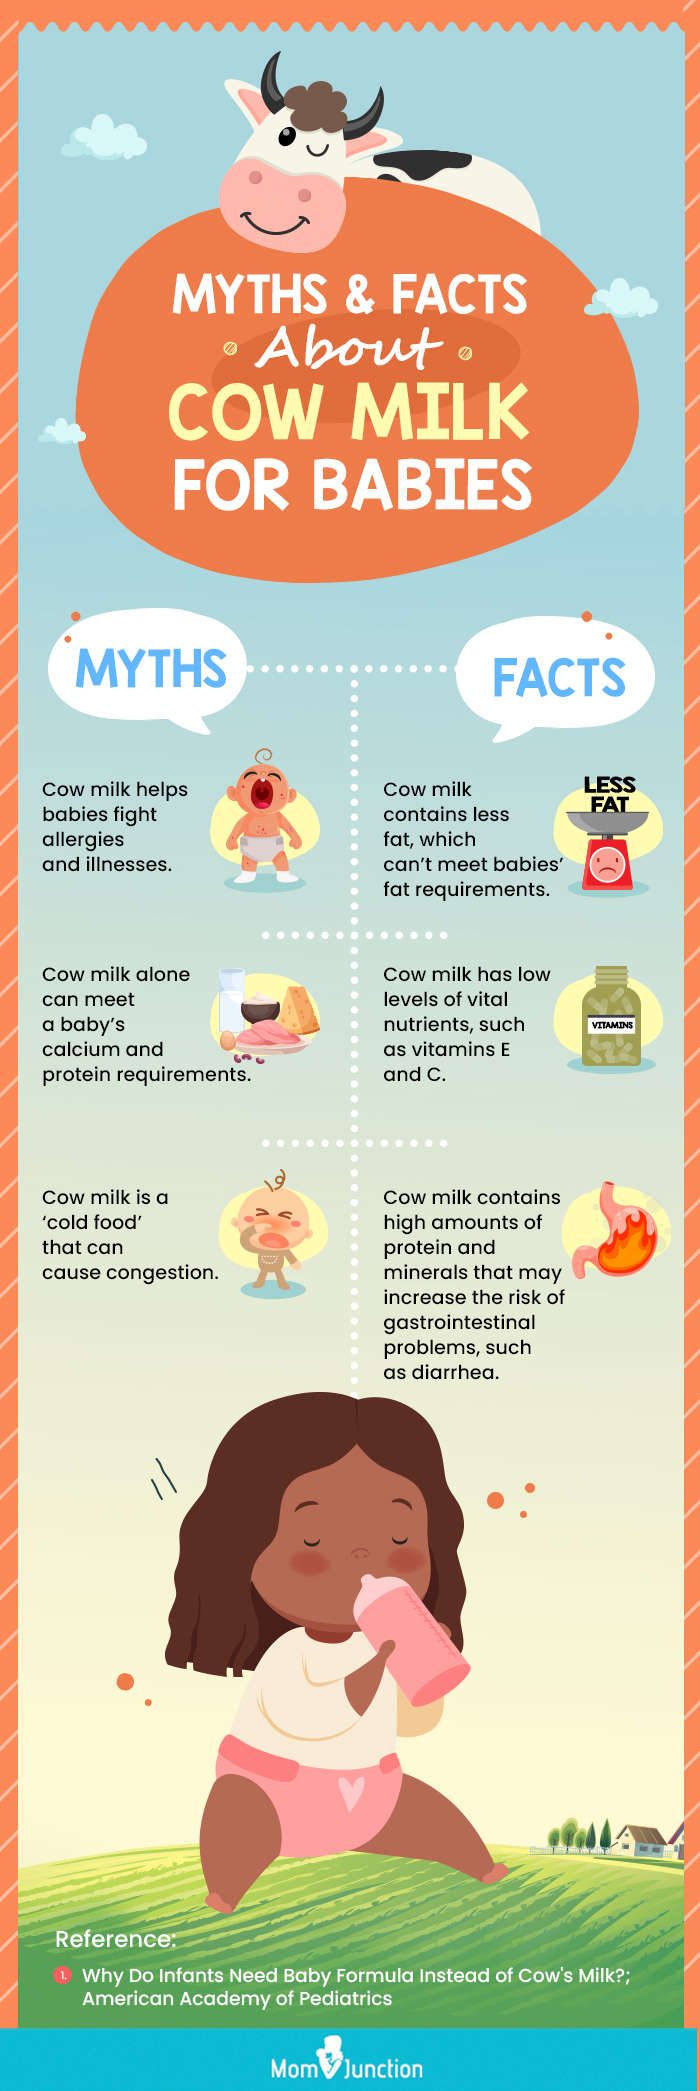 facts about cow milk for babies (infographic)